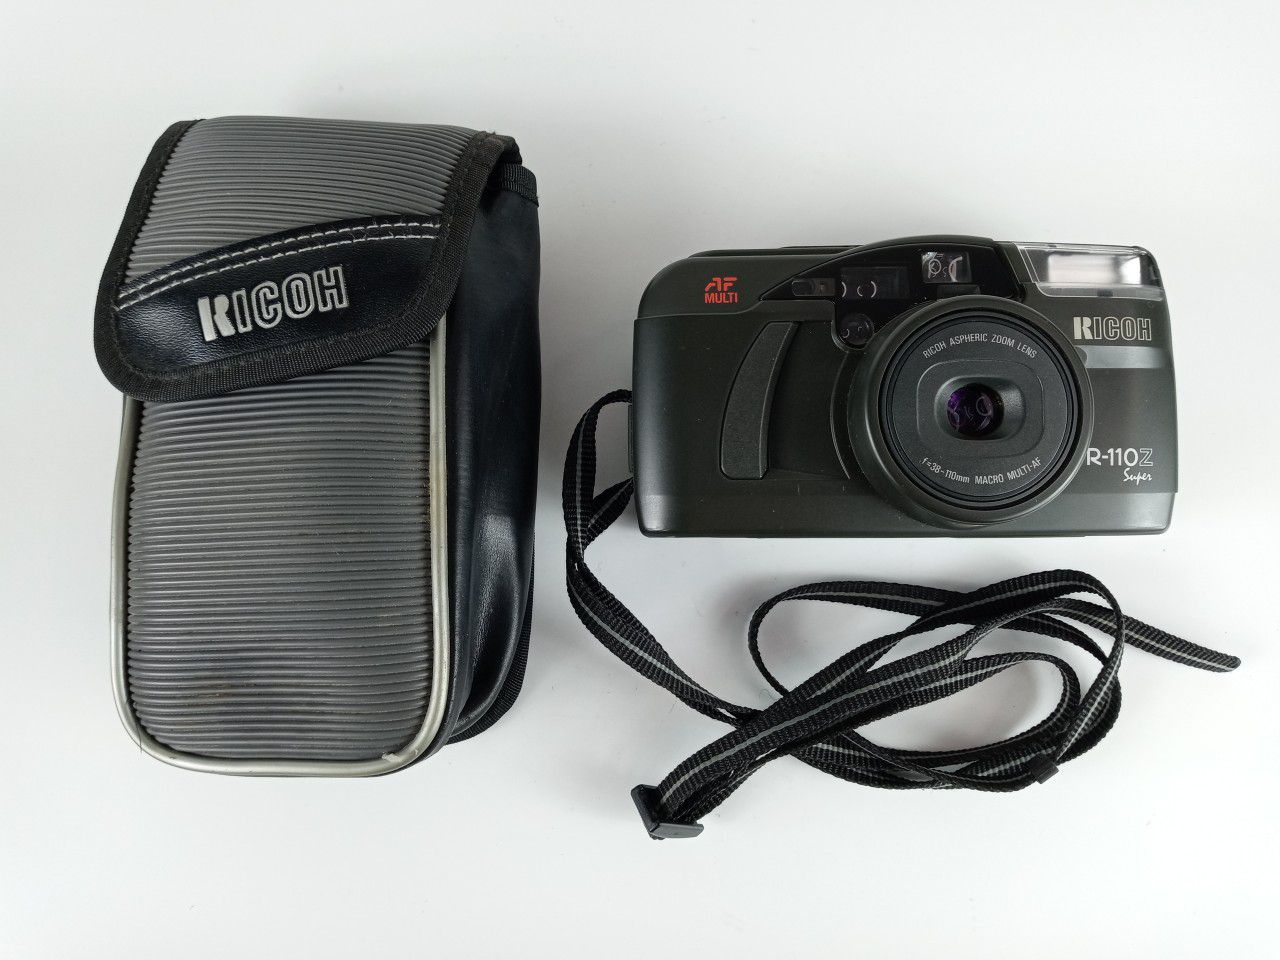 Ricoh R-110Z Super,38-110mm 35mm P&S Film Camera with Pouch